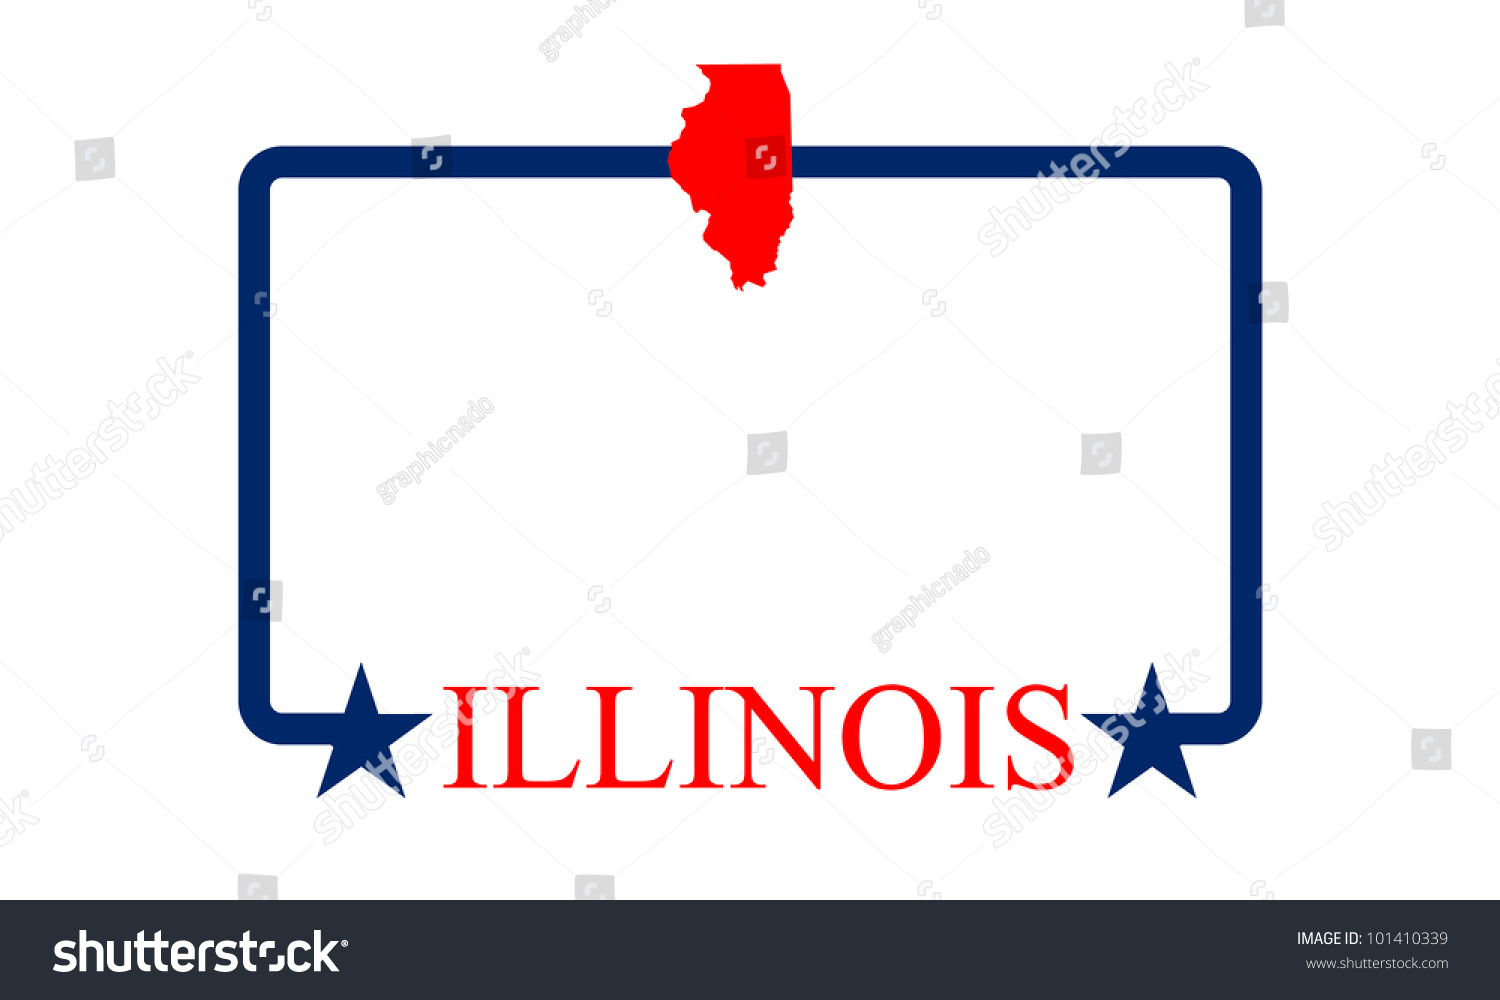 SVG of Illinois state map, star and name. svg